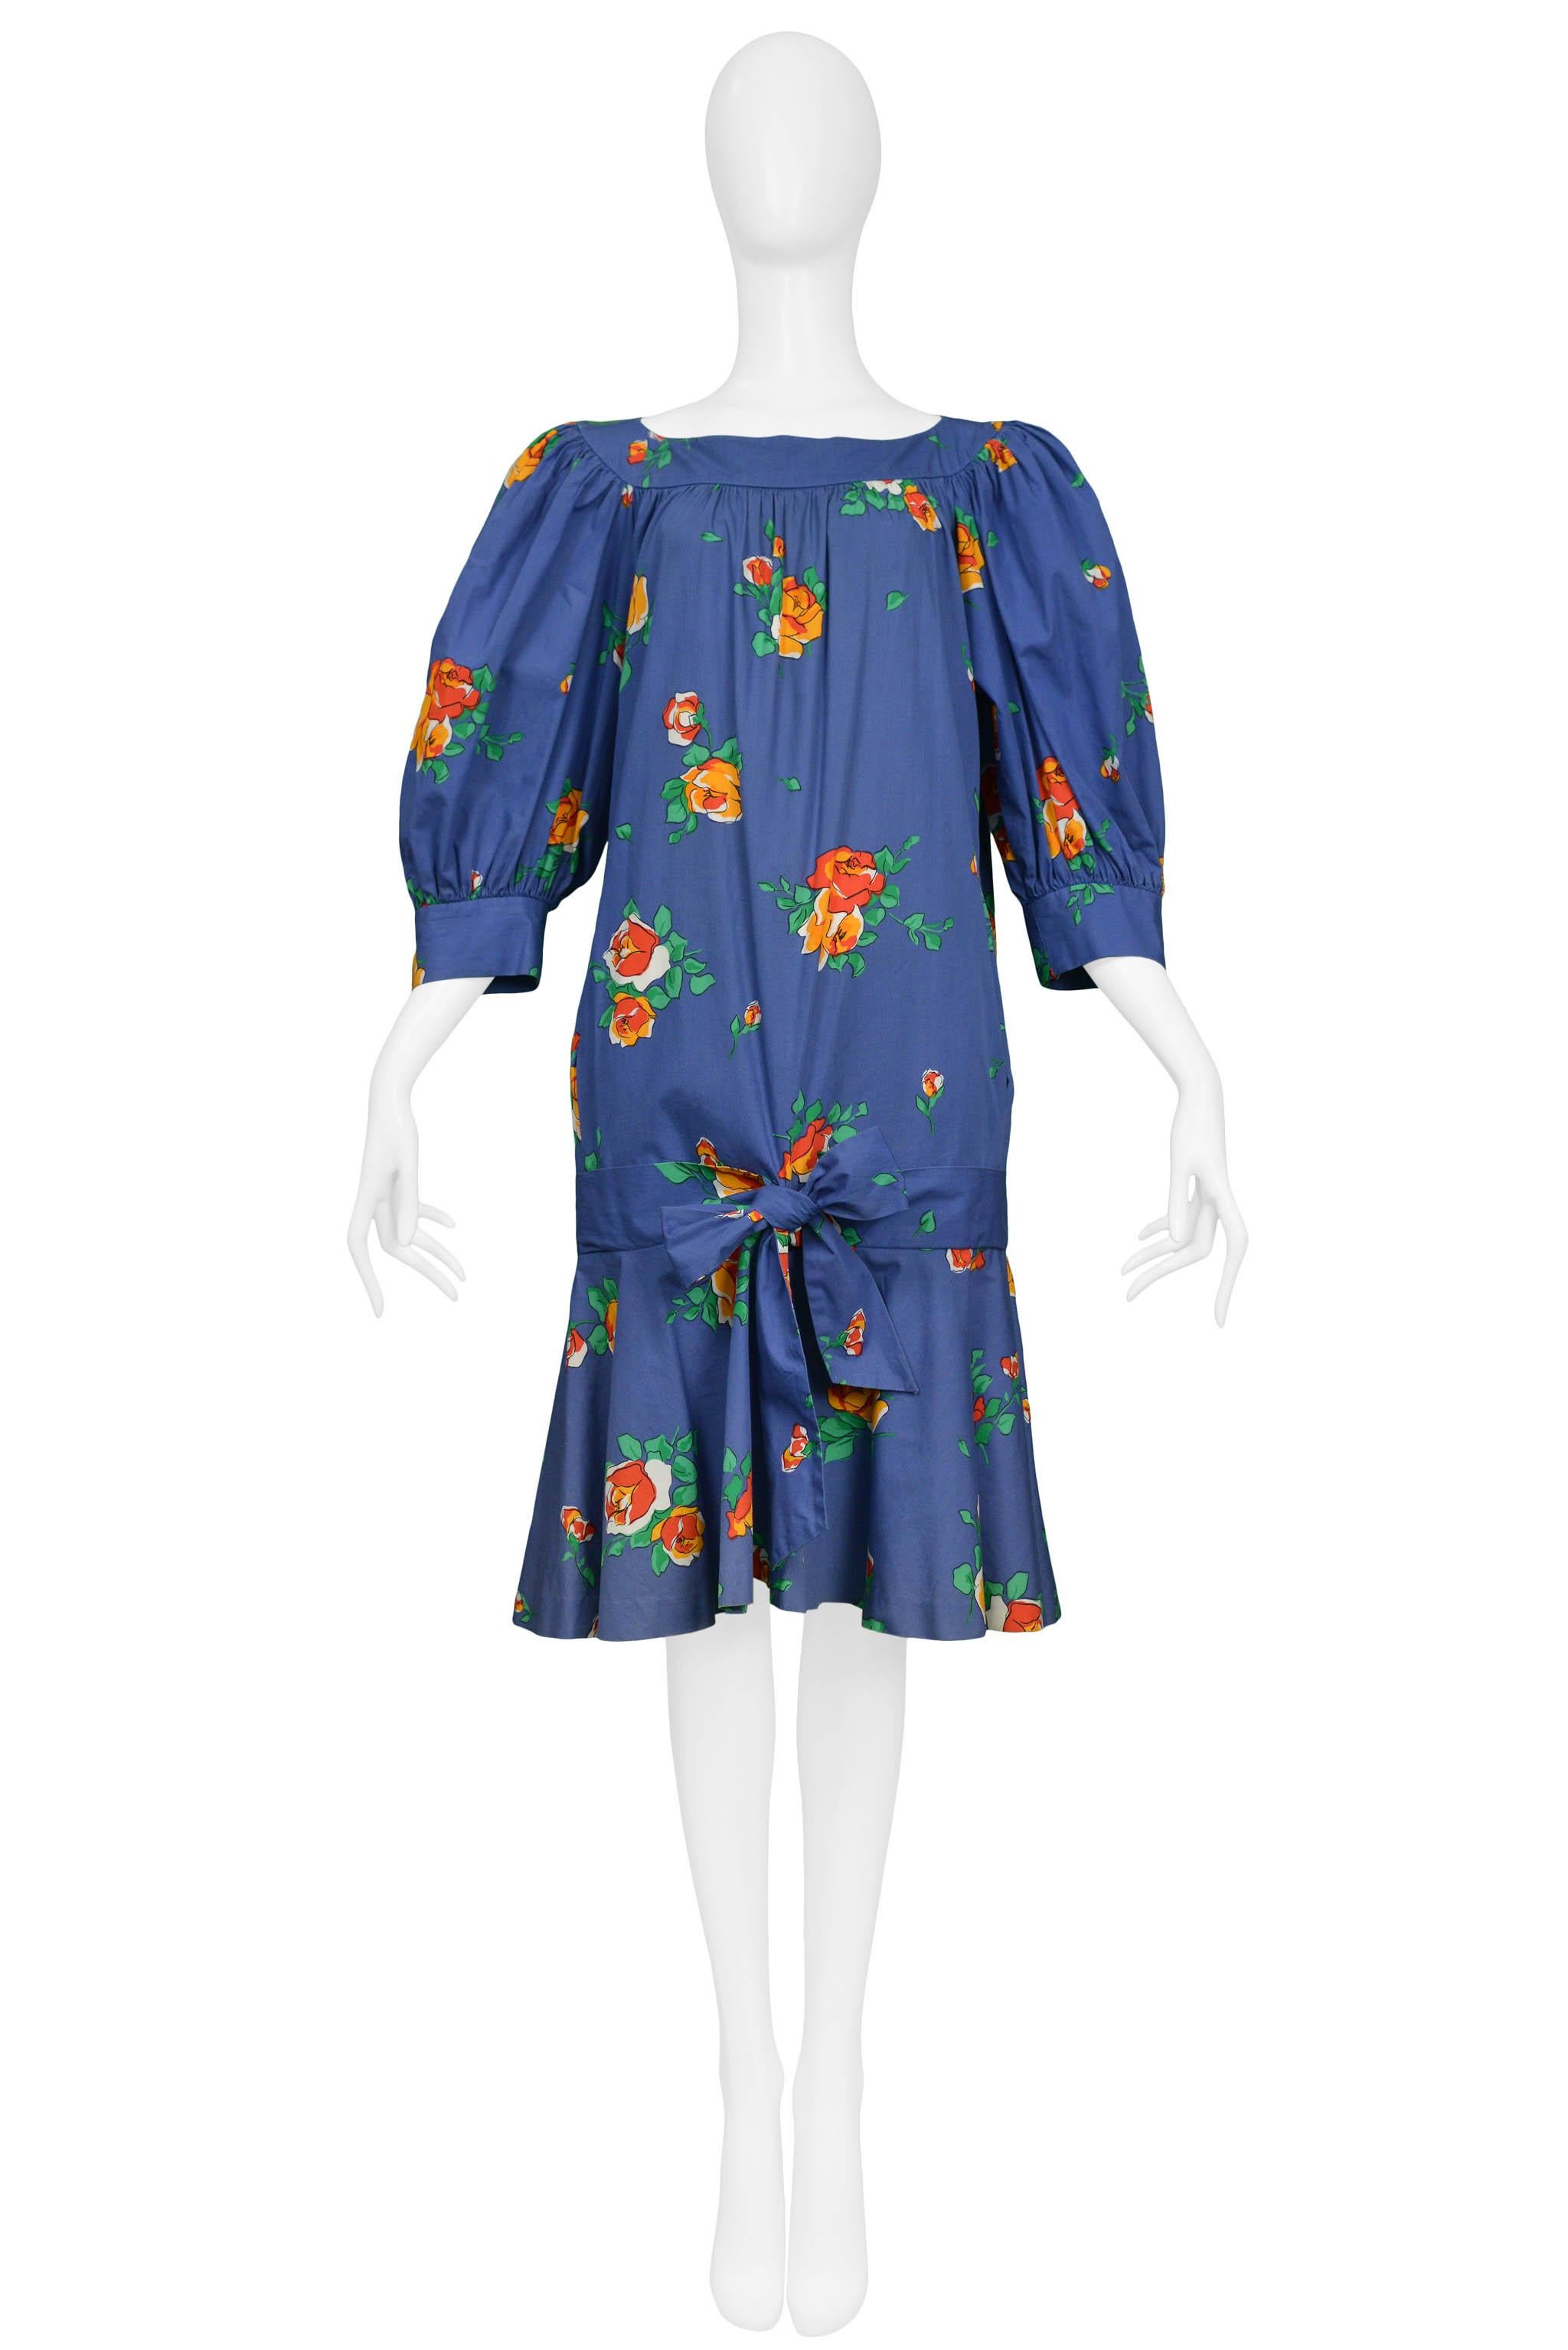 Resurrection Vintage is excited to offer a vintage floral Yves Saint Laurent blue cotton smock dress with a drop waist and knit tie front. The dress features a boat neck, blouson sleeves, and knee-length.

Yves Saint Laurent
Size